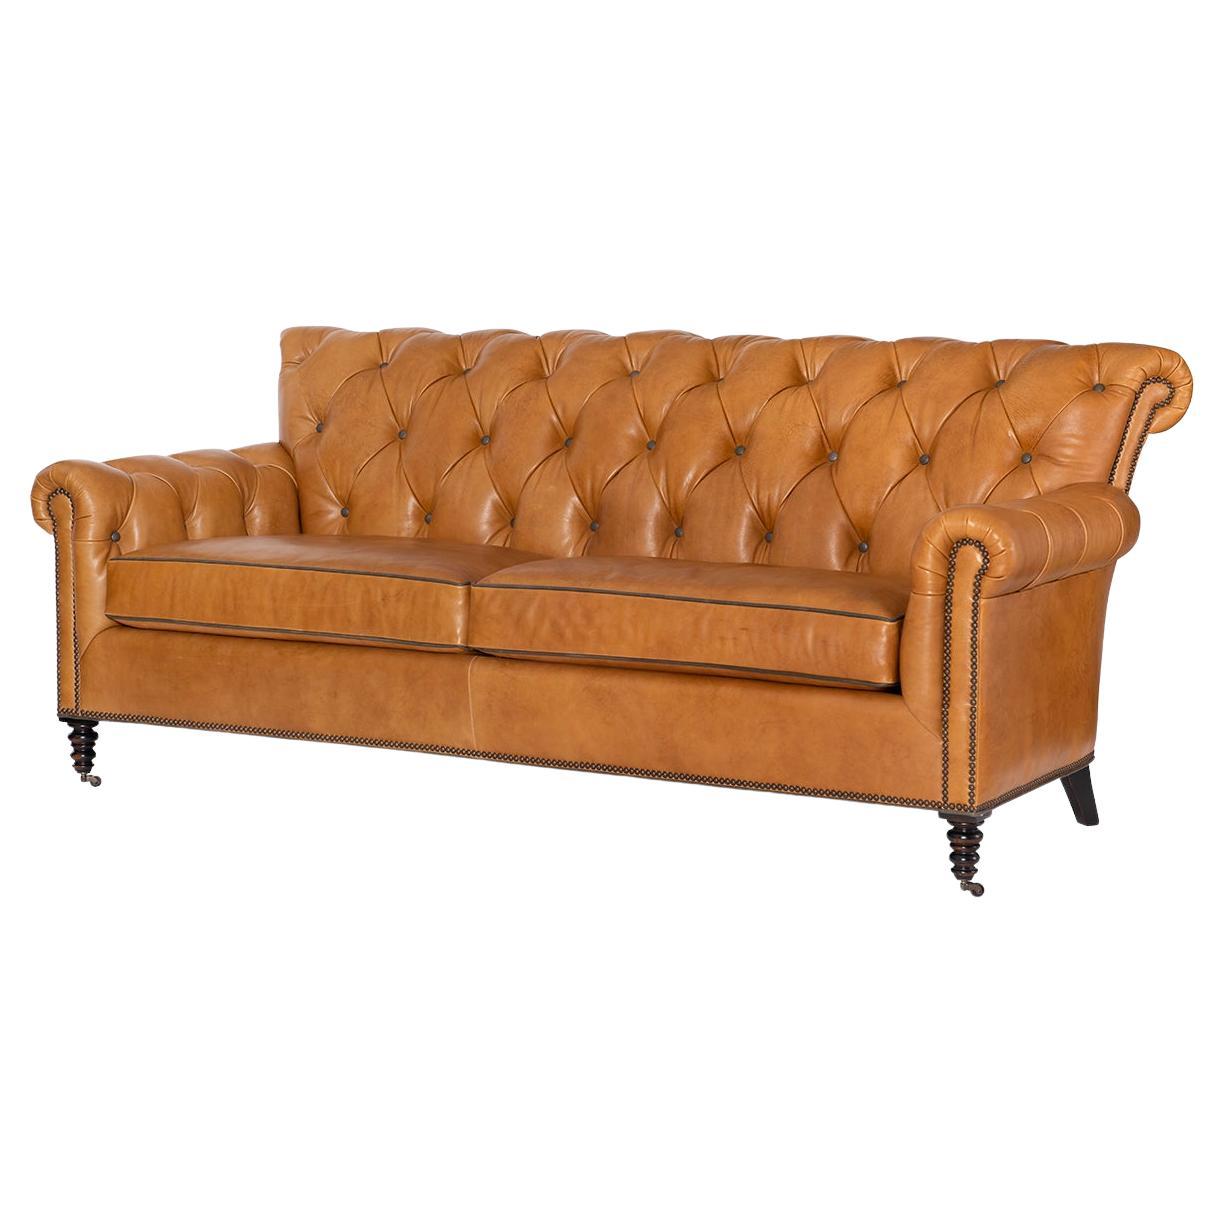 Classic Tufted 3 Seater Sofa For Sale